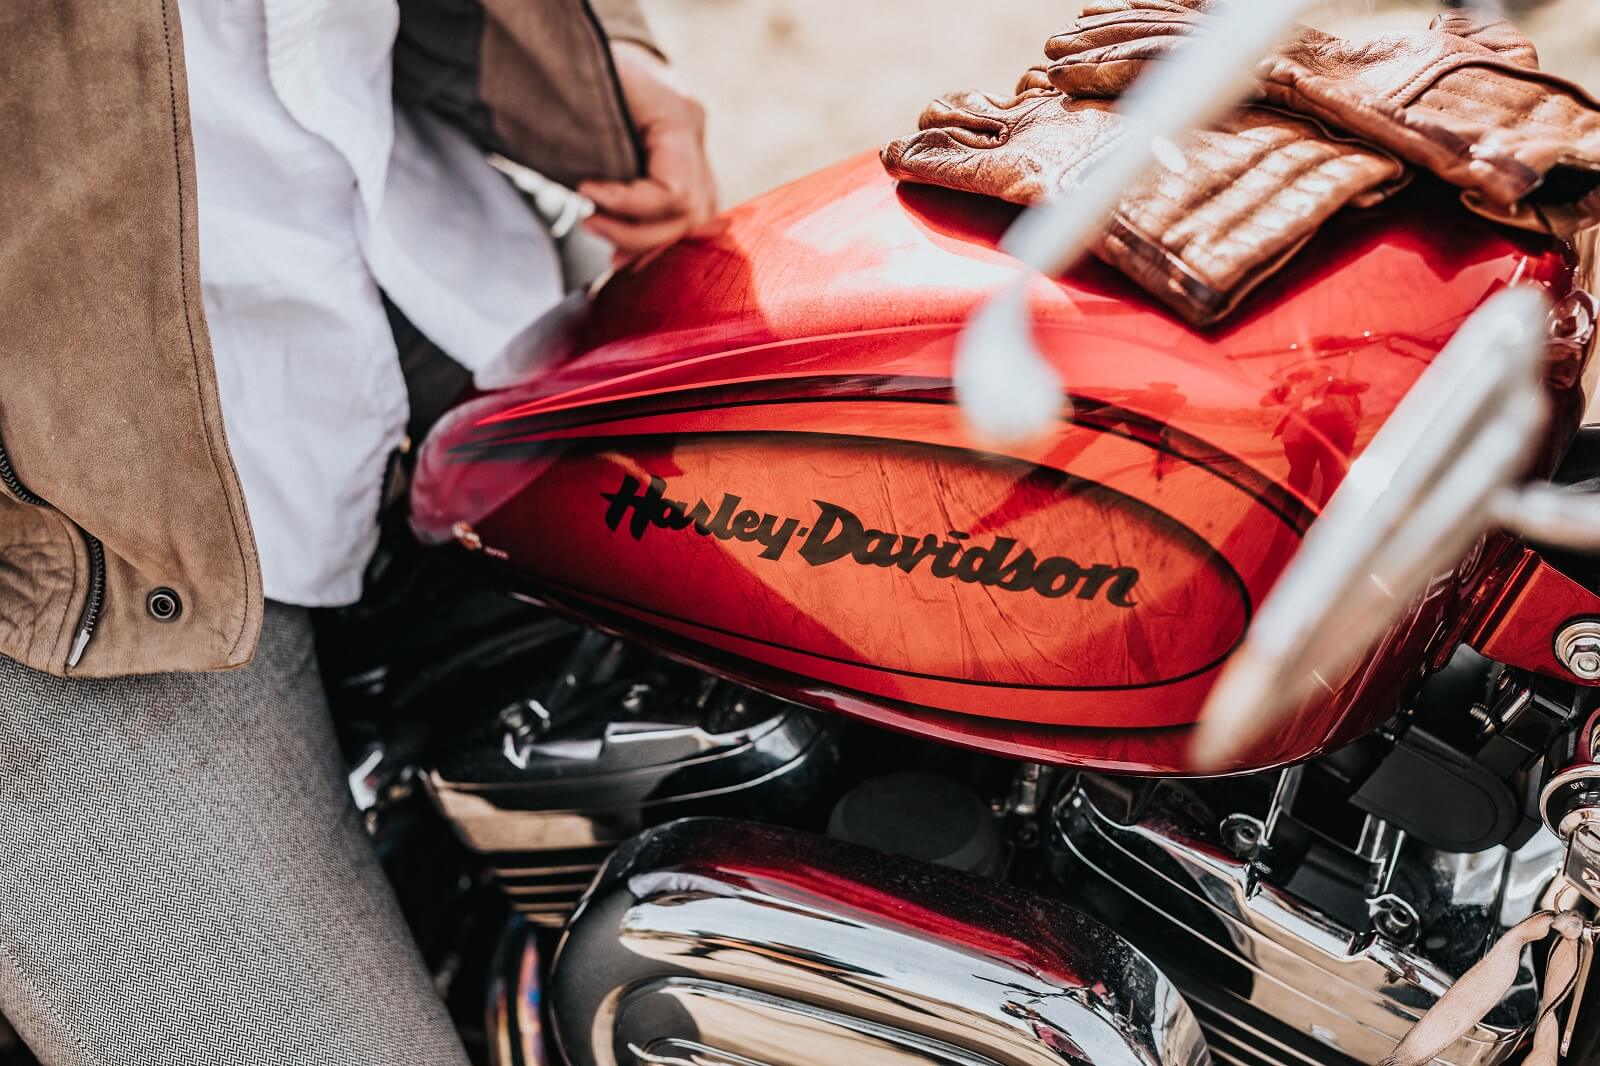 harley-davidson-harley-which-came-in-a-mango-deal-slows-down-look-who-s-stepping-on-the-gas-triumph-enfield